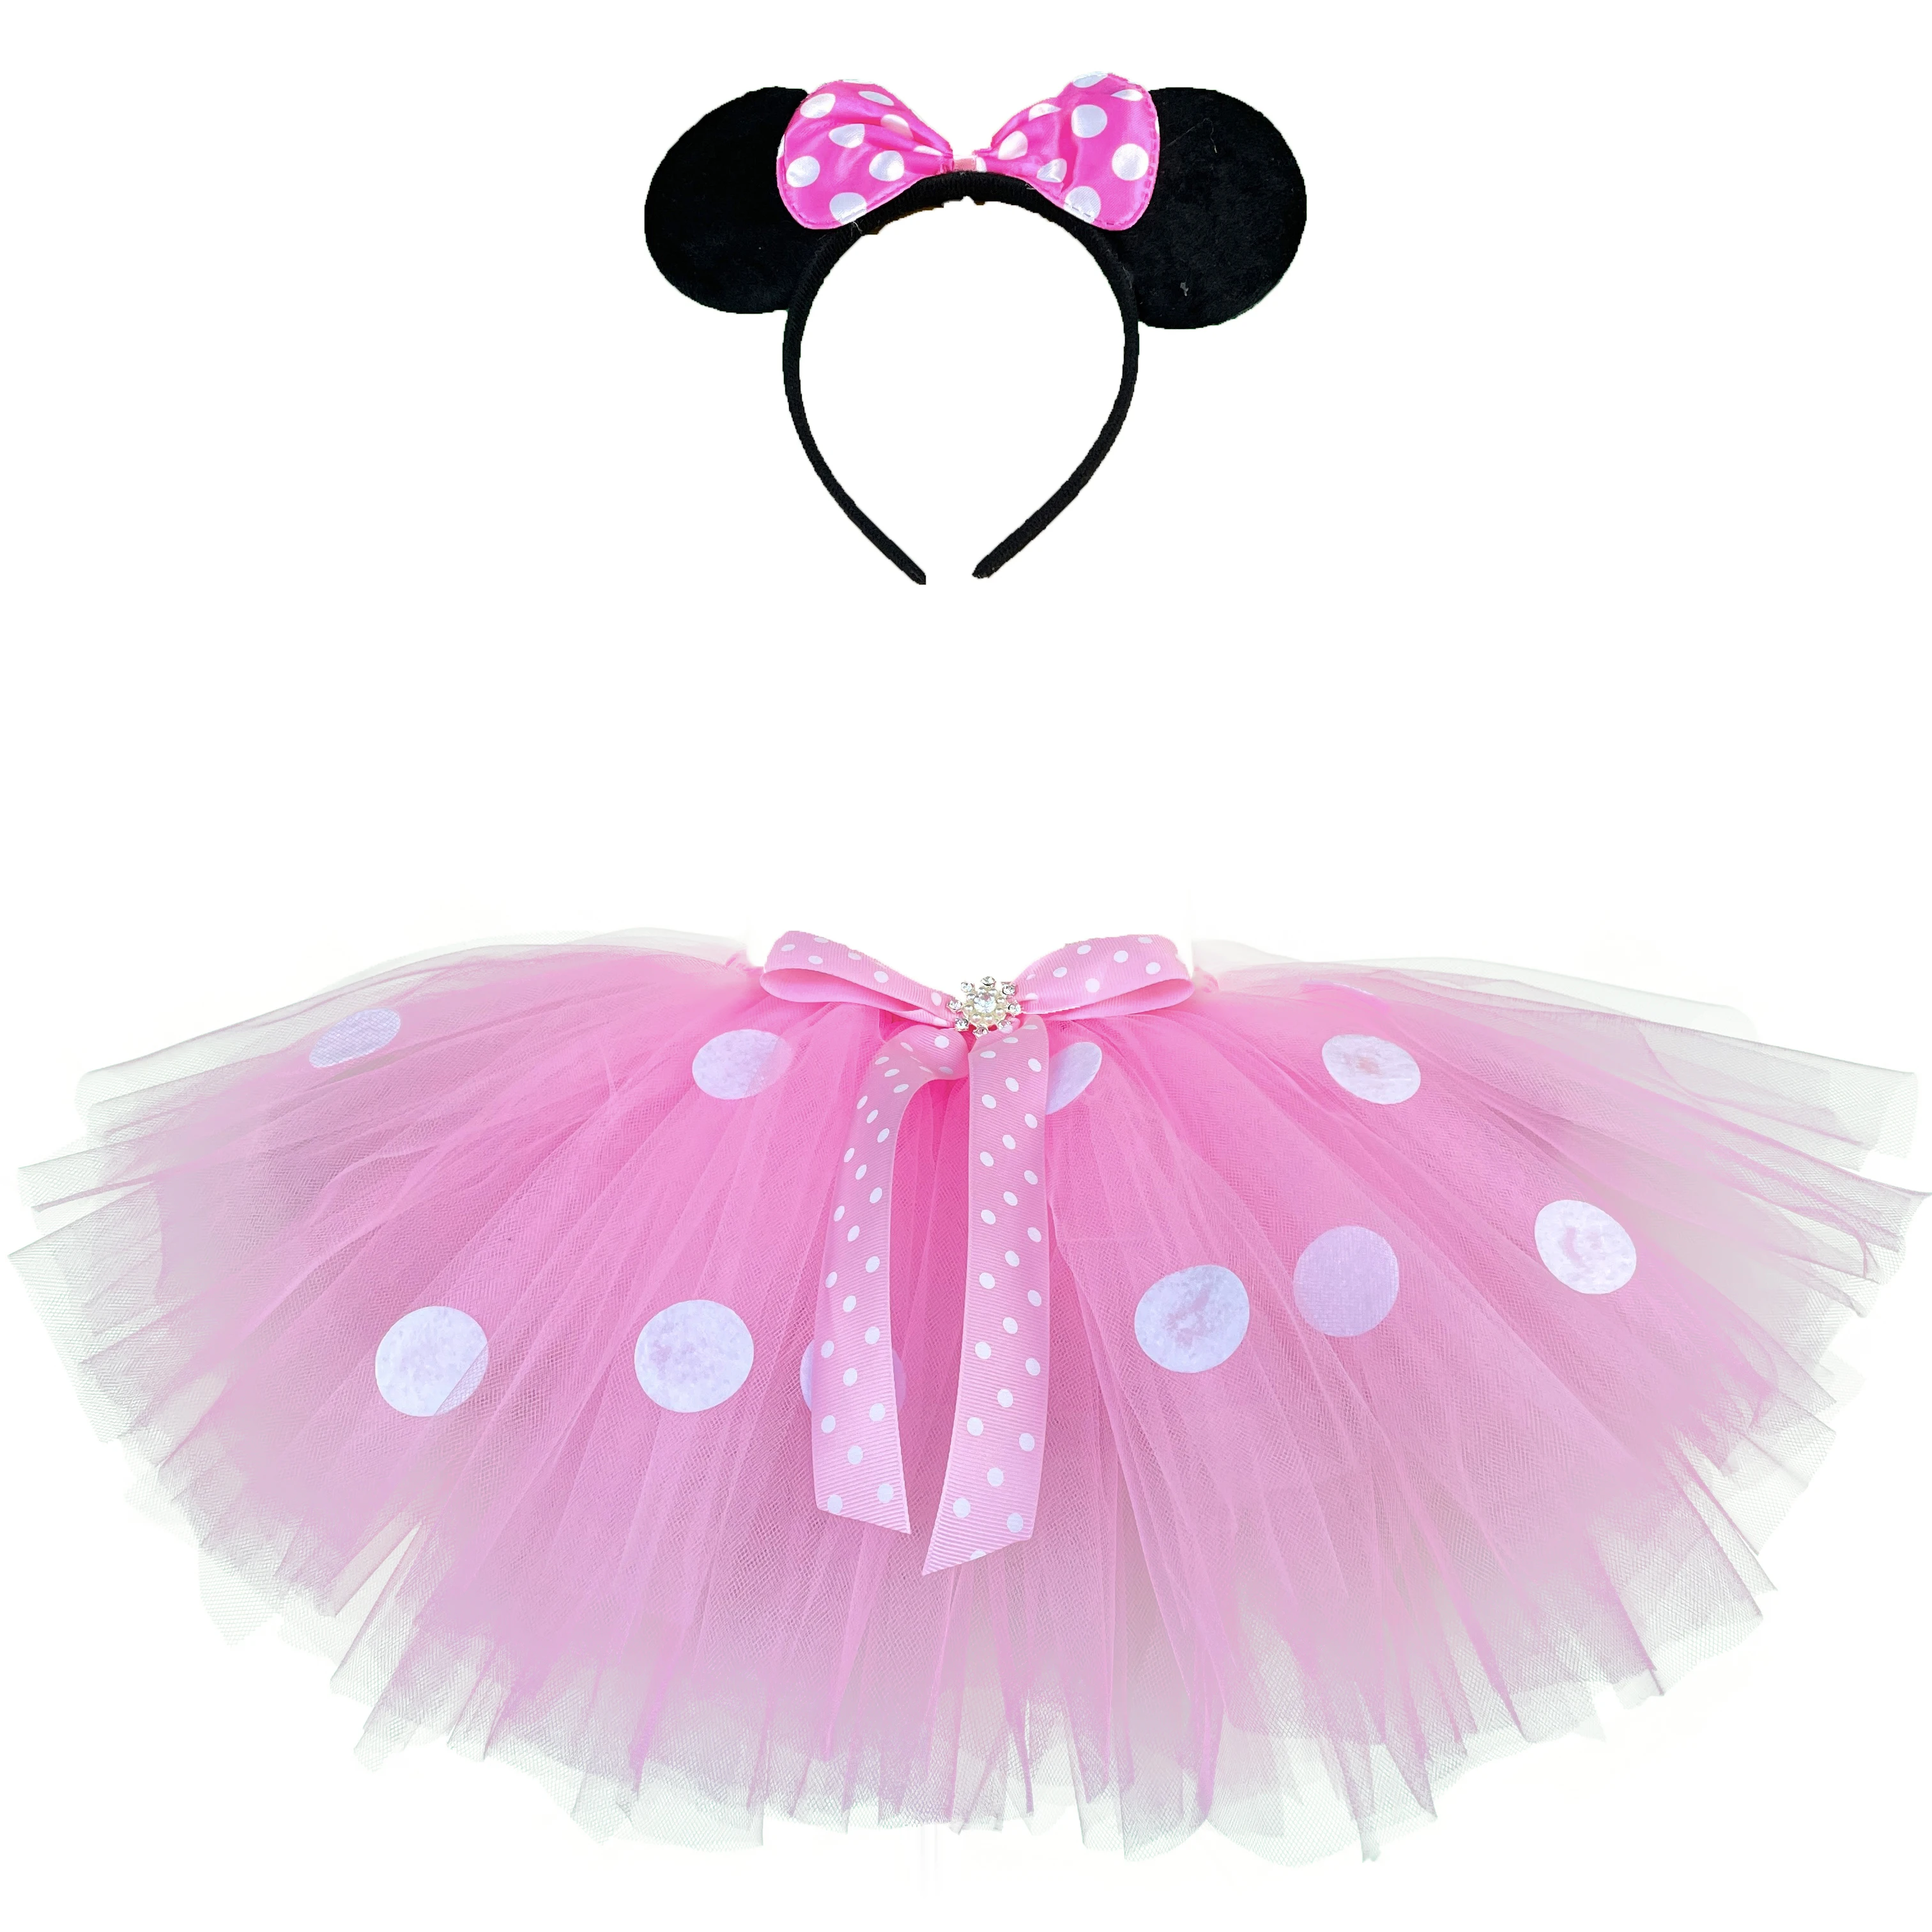 Girls Pink Mickey Tutu Skirts Baby Ballet Tulle Pettiskirts with White Polka Dots and Hairbow Kids Cosplay Party Costume Skirts